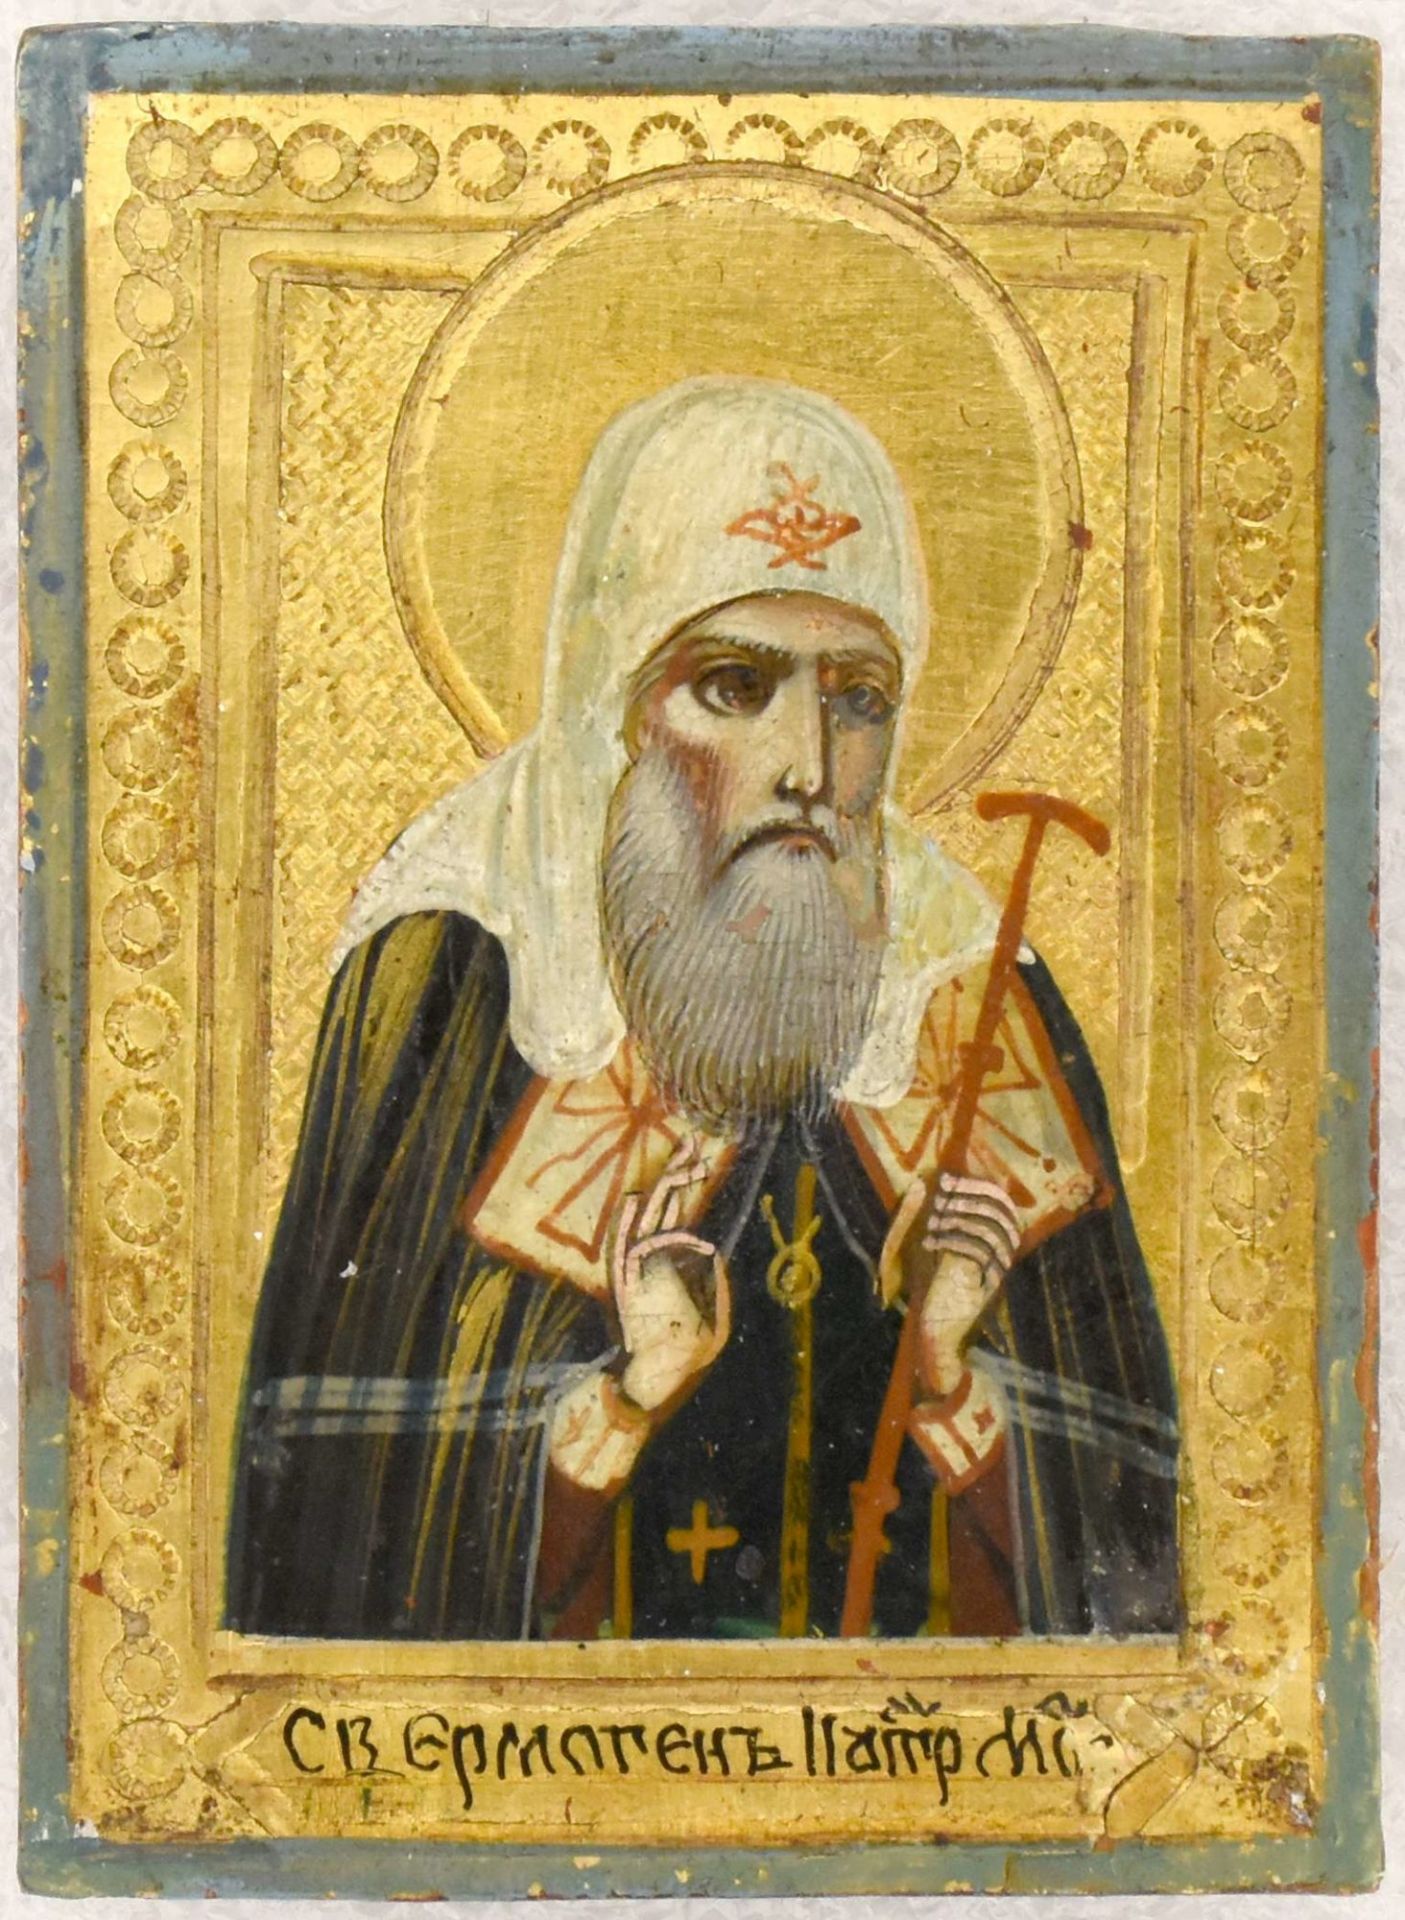 Russian icon "Saint Patriarch Hermogenes of Moscow". - Russia, 19th cent. - 7x5 cm.